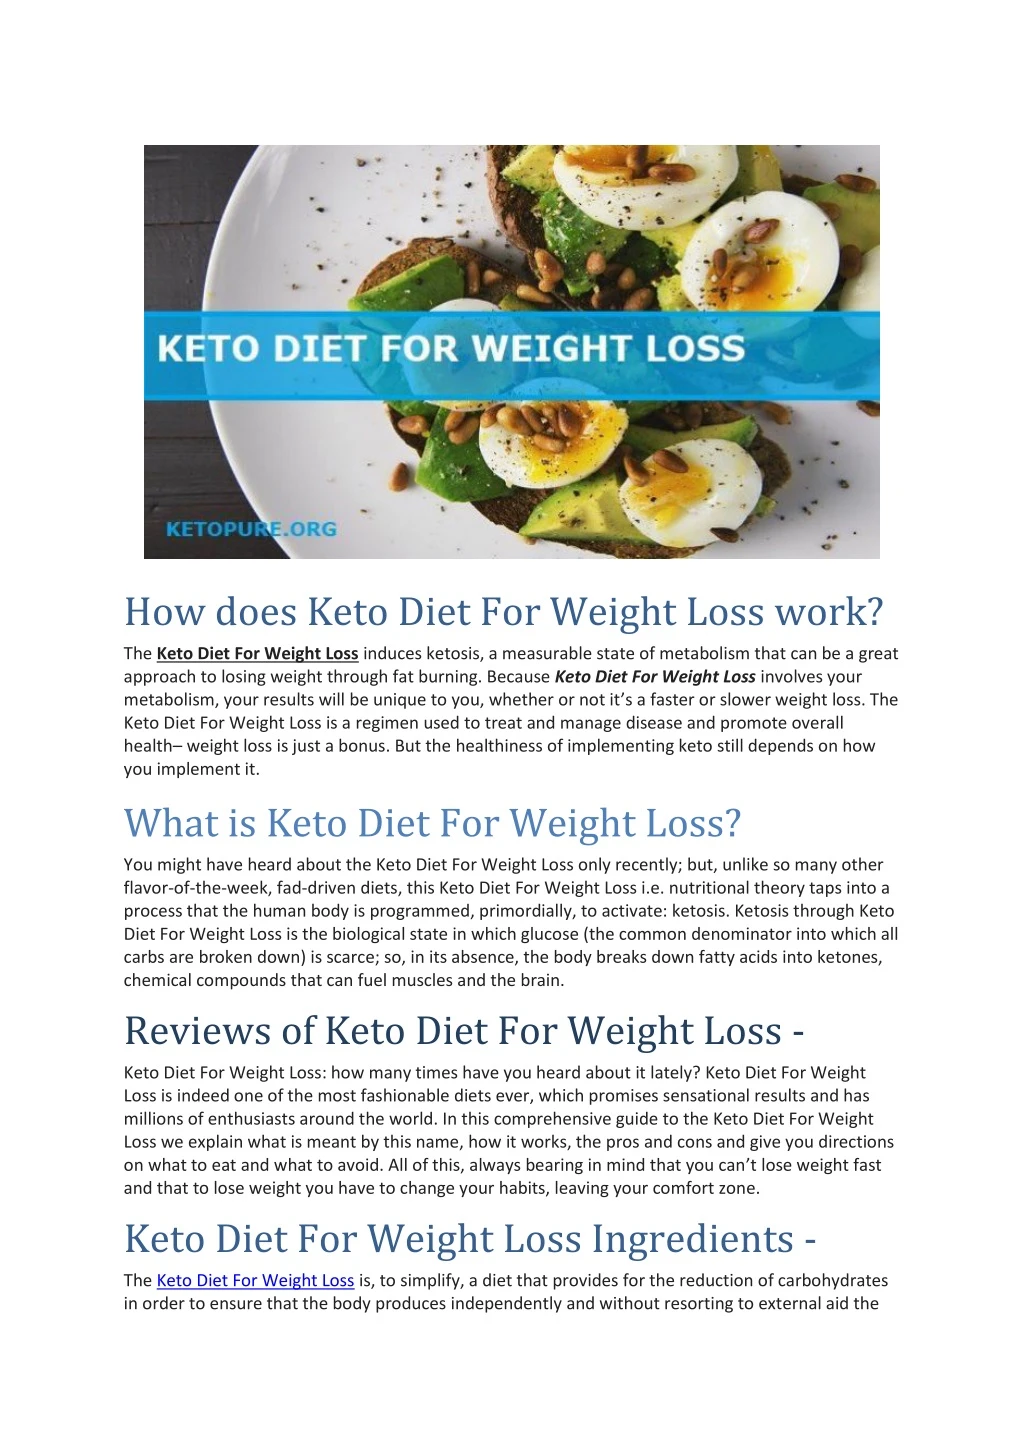 how does keto diet for weight loss work